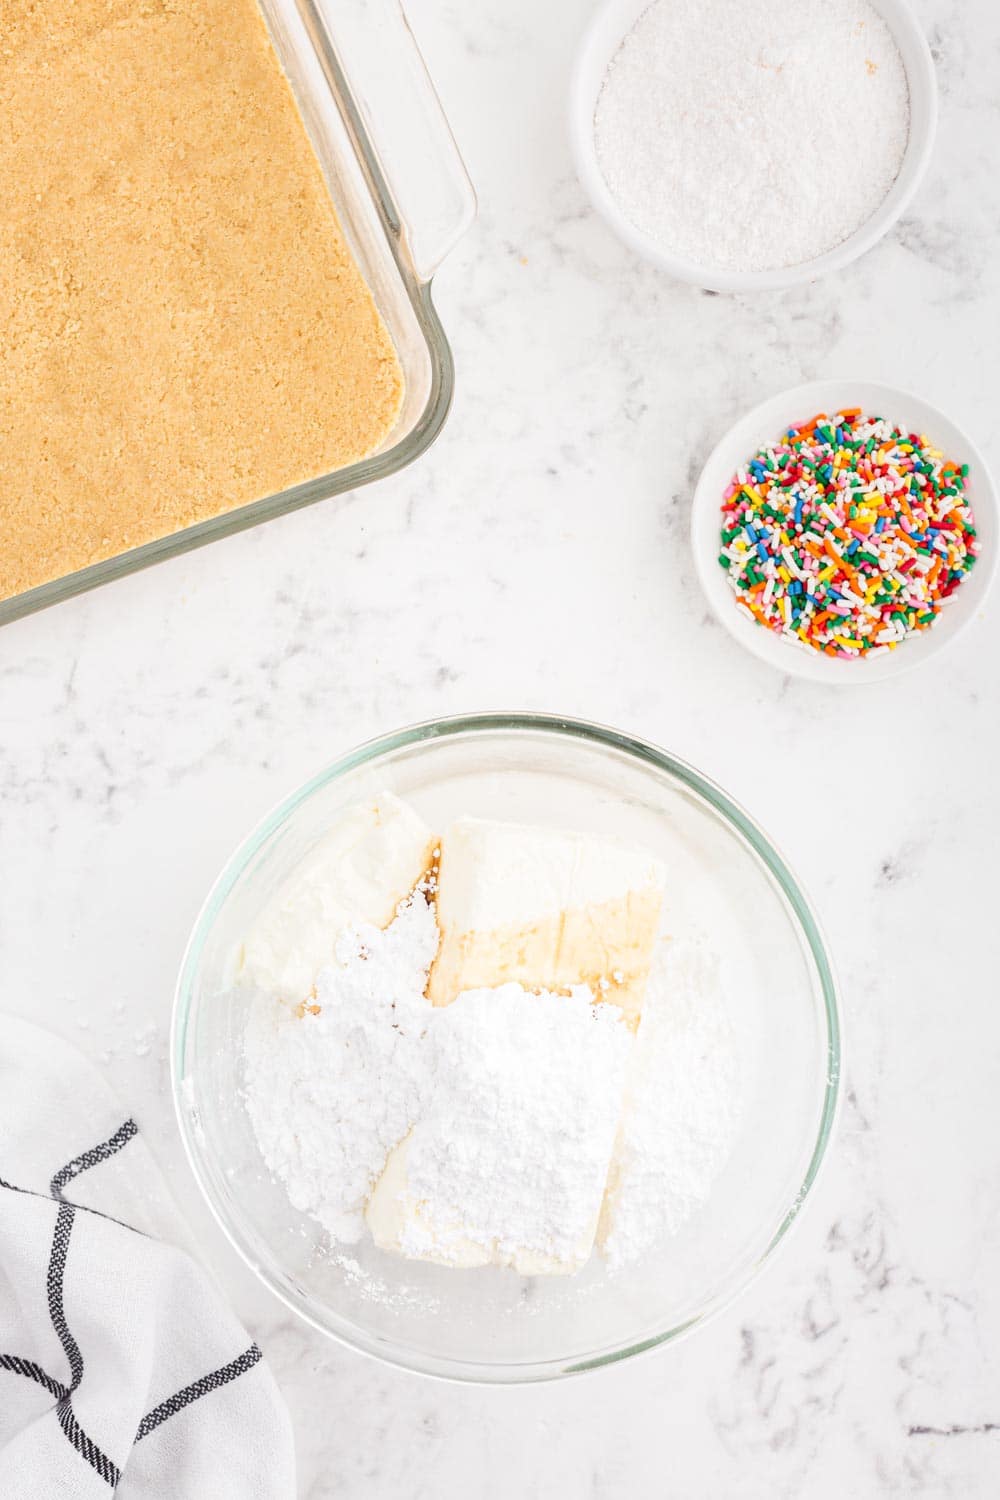 Cream cheese, powdered sugar, vanilla extract, and whipped topping added to a standing mixer bowl, small bowl of rainbow sprinkles, bowl of powdered sugar, glass dish with cookie crust, striped linen, on a white marble surface.